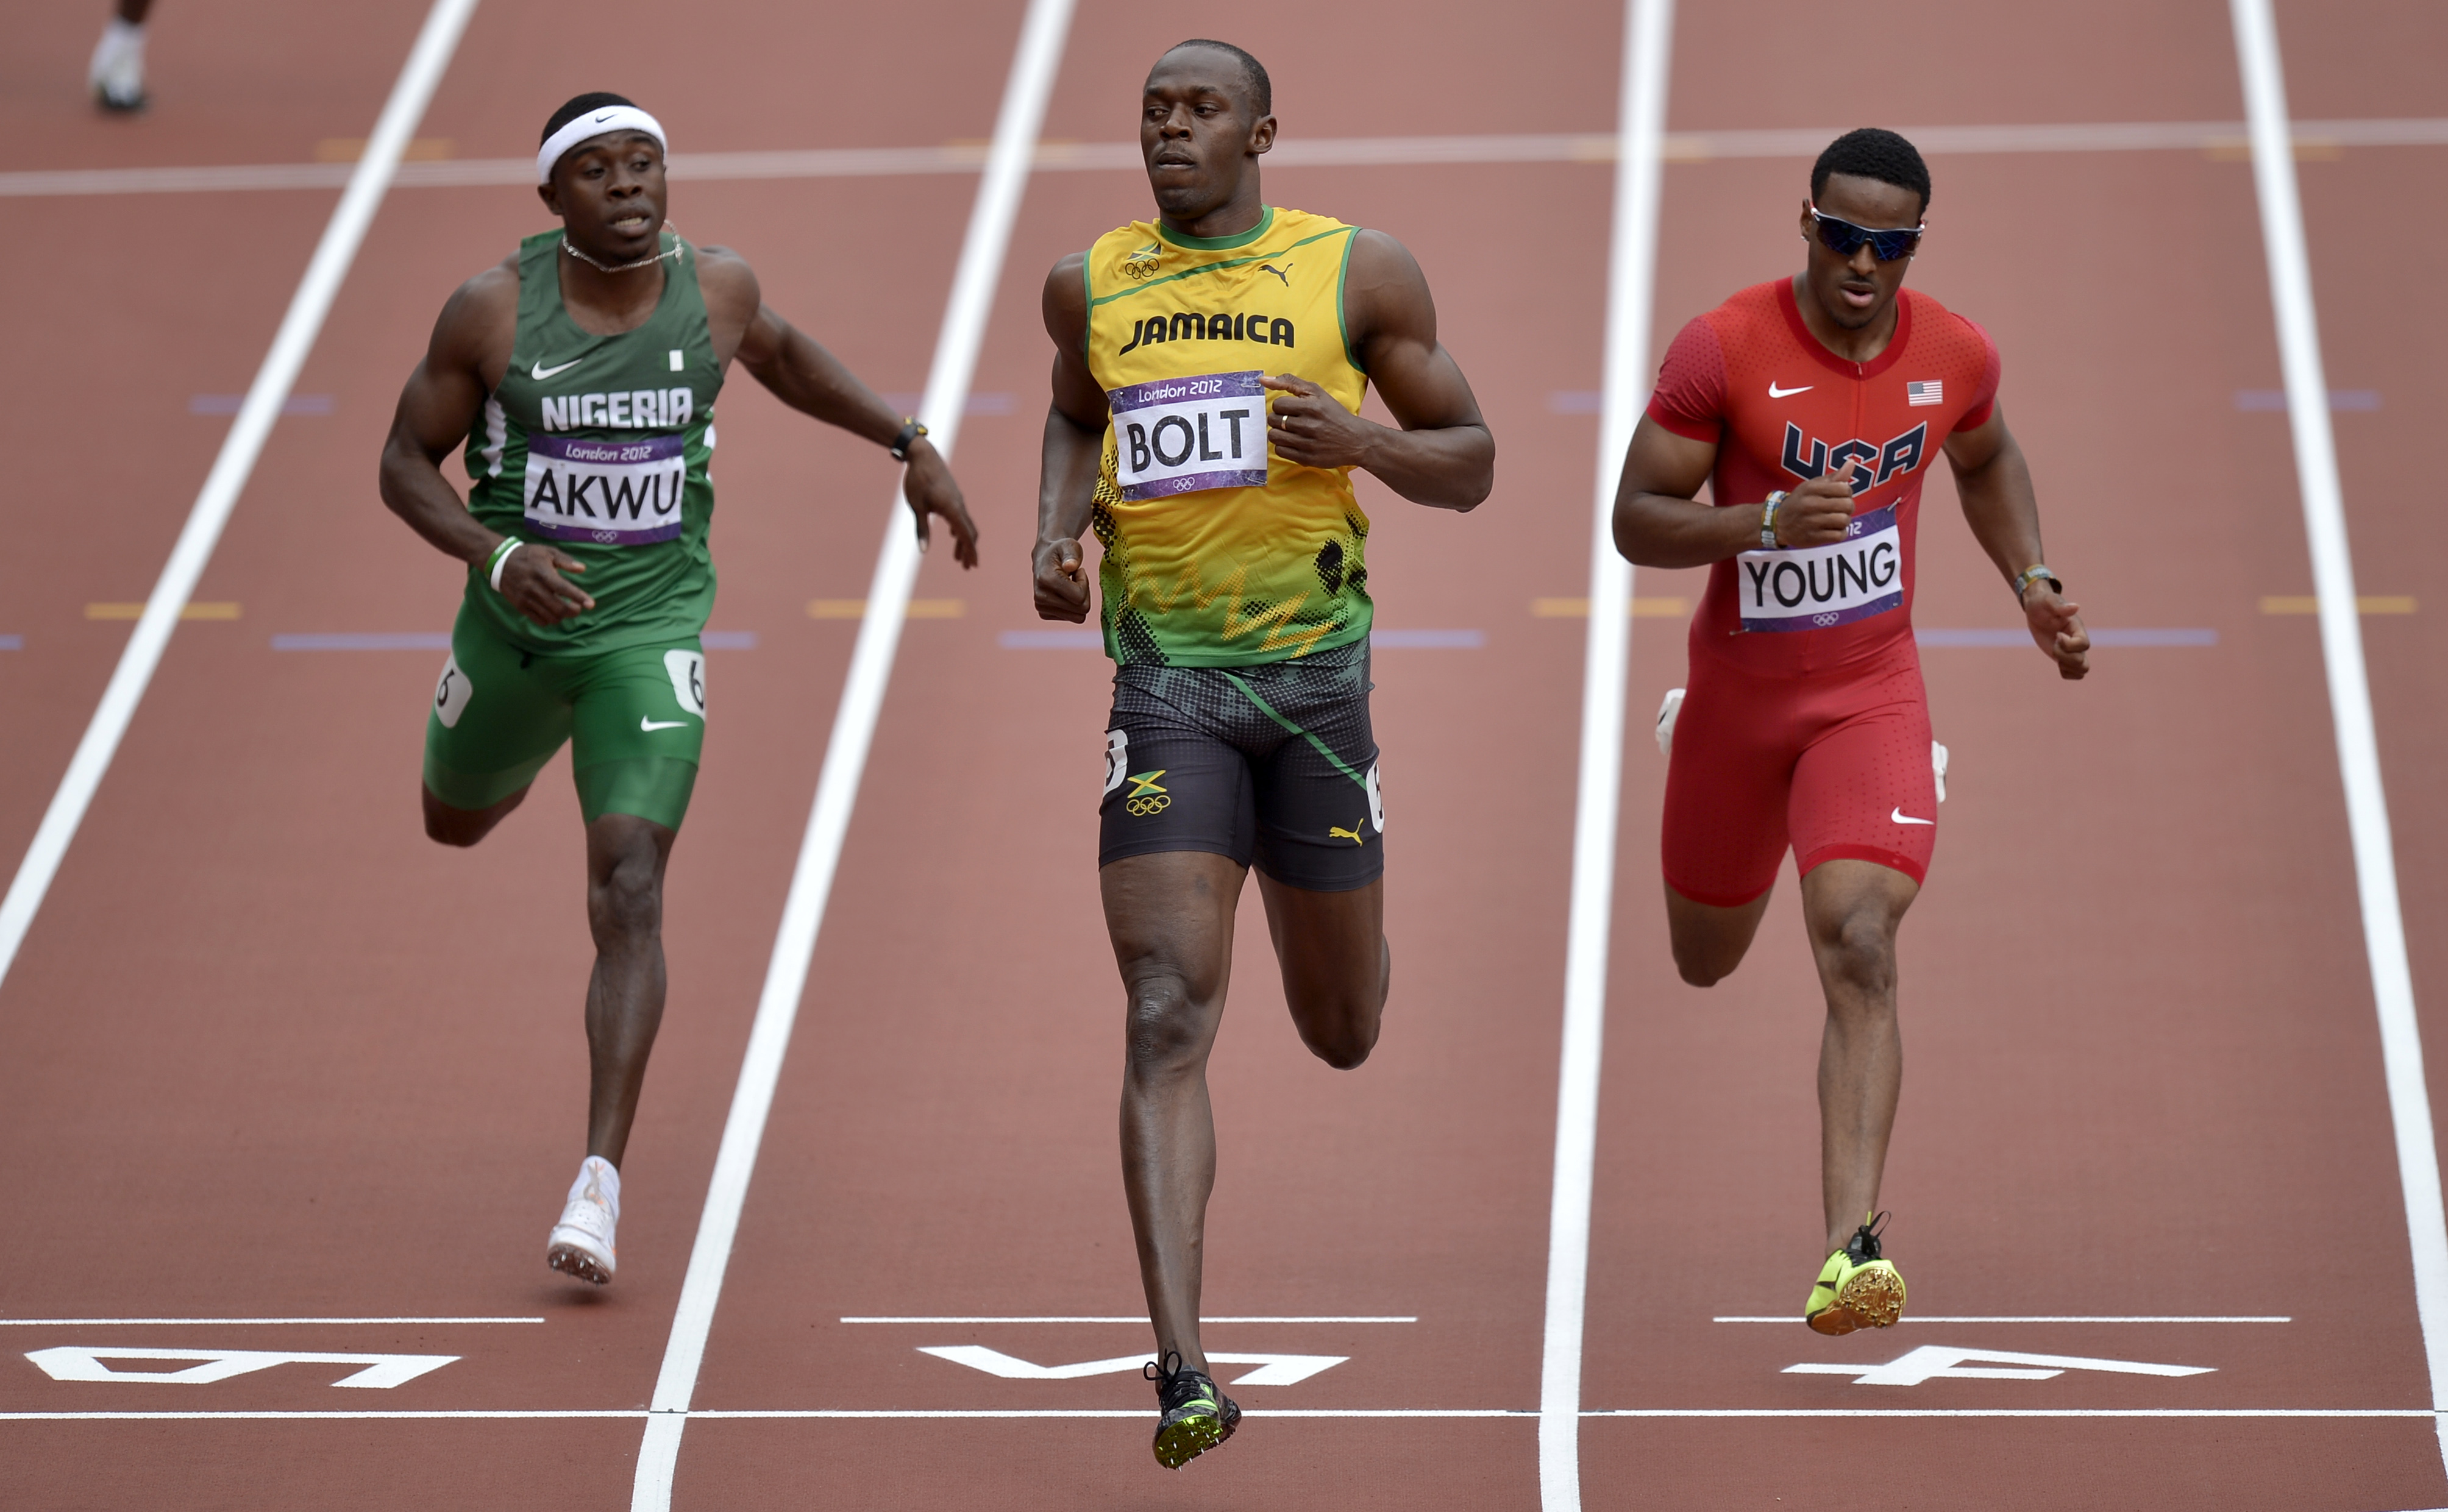 Nigeria's Noah Akwu, left, Jamaica's Usain Bolt, center, and United States' Isiah Young, right, cross the finish line in a men's 200-meter heat during the athletics in the Olympic Stadium at the 2012 Summer Olympics, London, Tuesday, Aug. 7, 2012.(AP Photo/Martin Meissner)